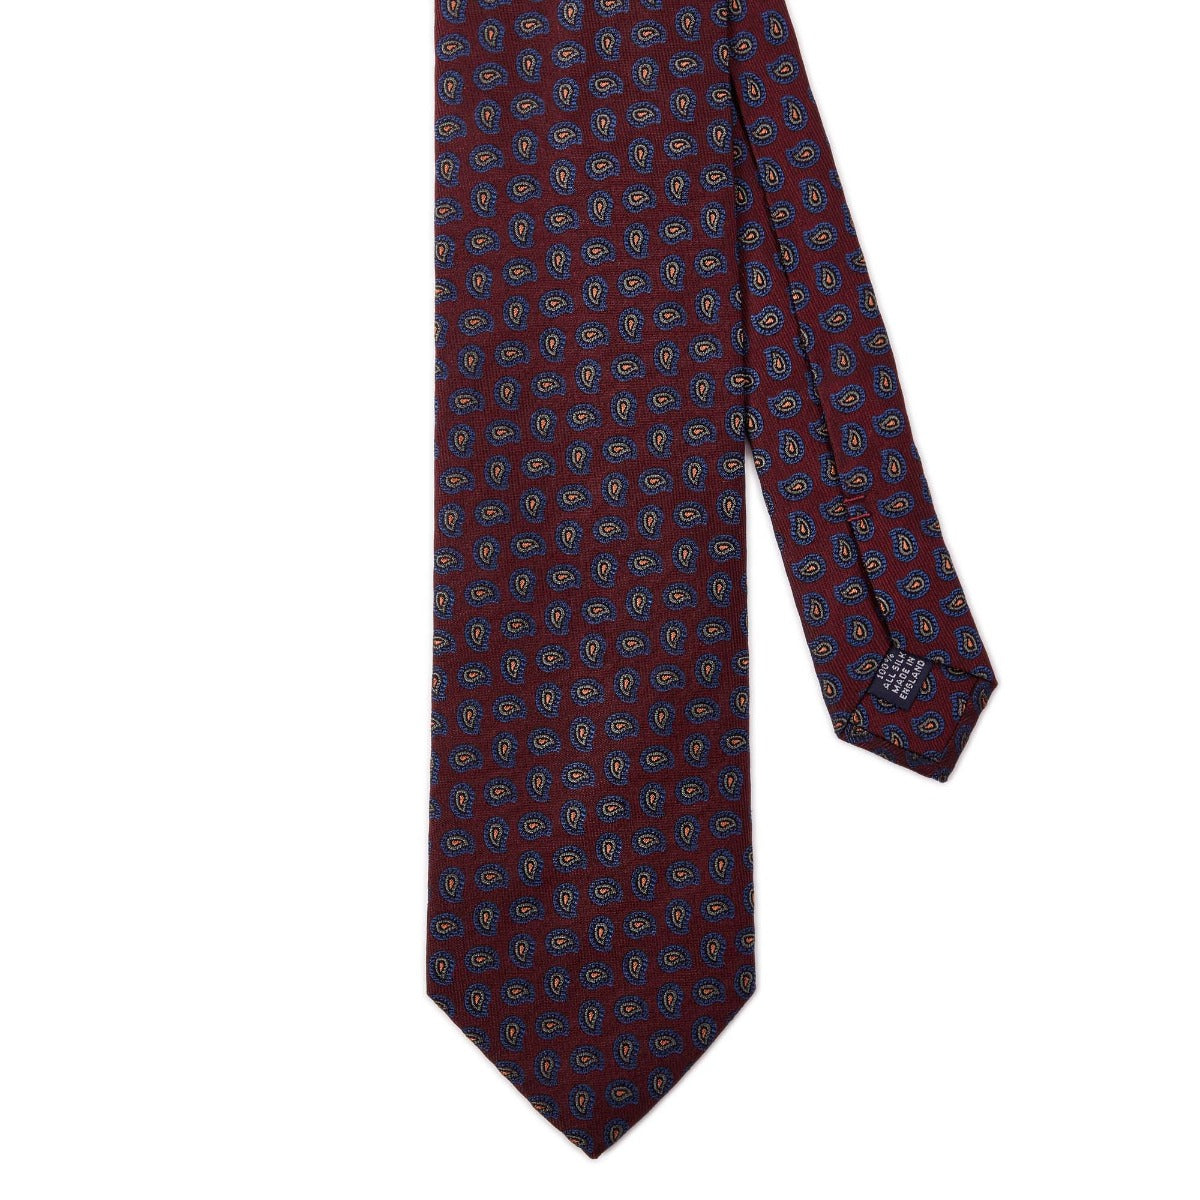 A Sovereign Grade Burgundy Paisley Jacquard Silk Tie from KirbyAllison.com with blue and red polka dots of quality.